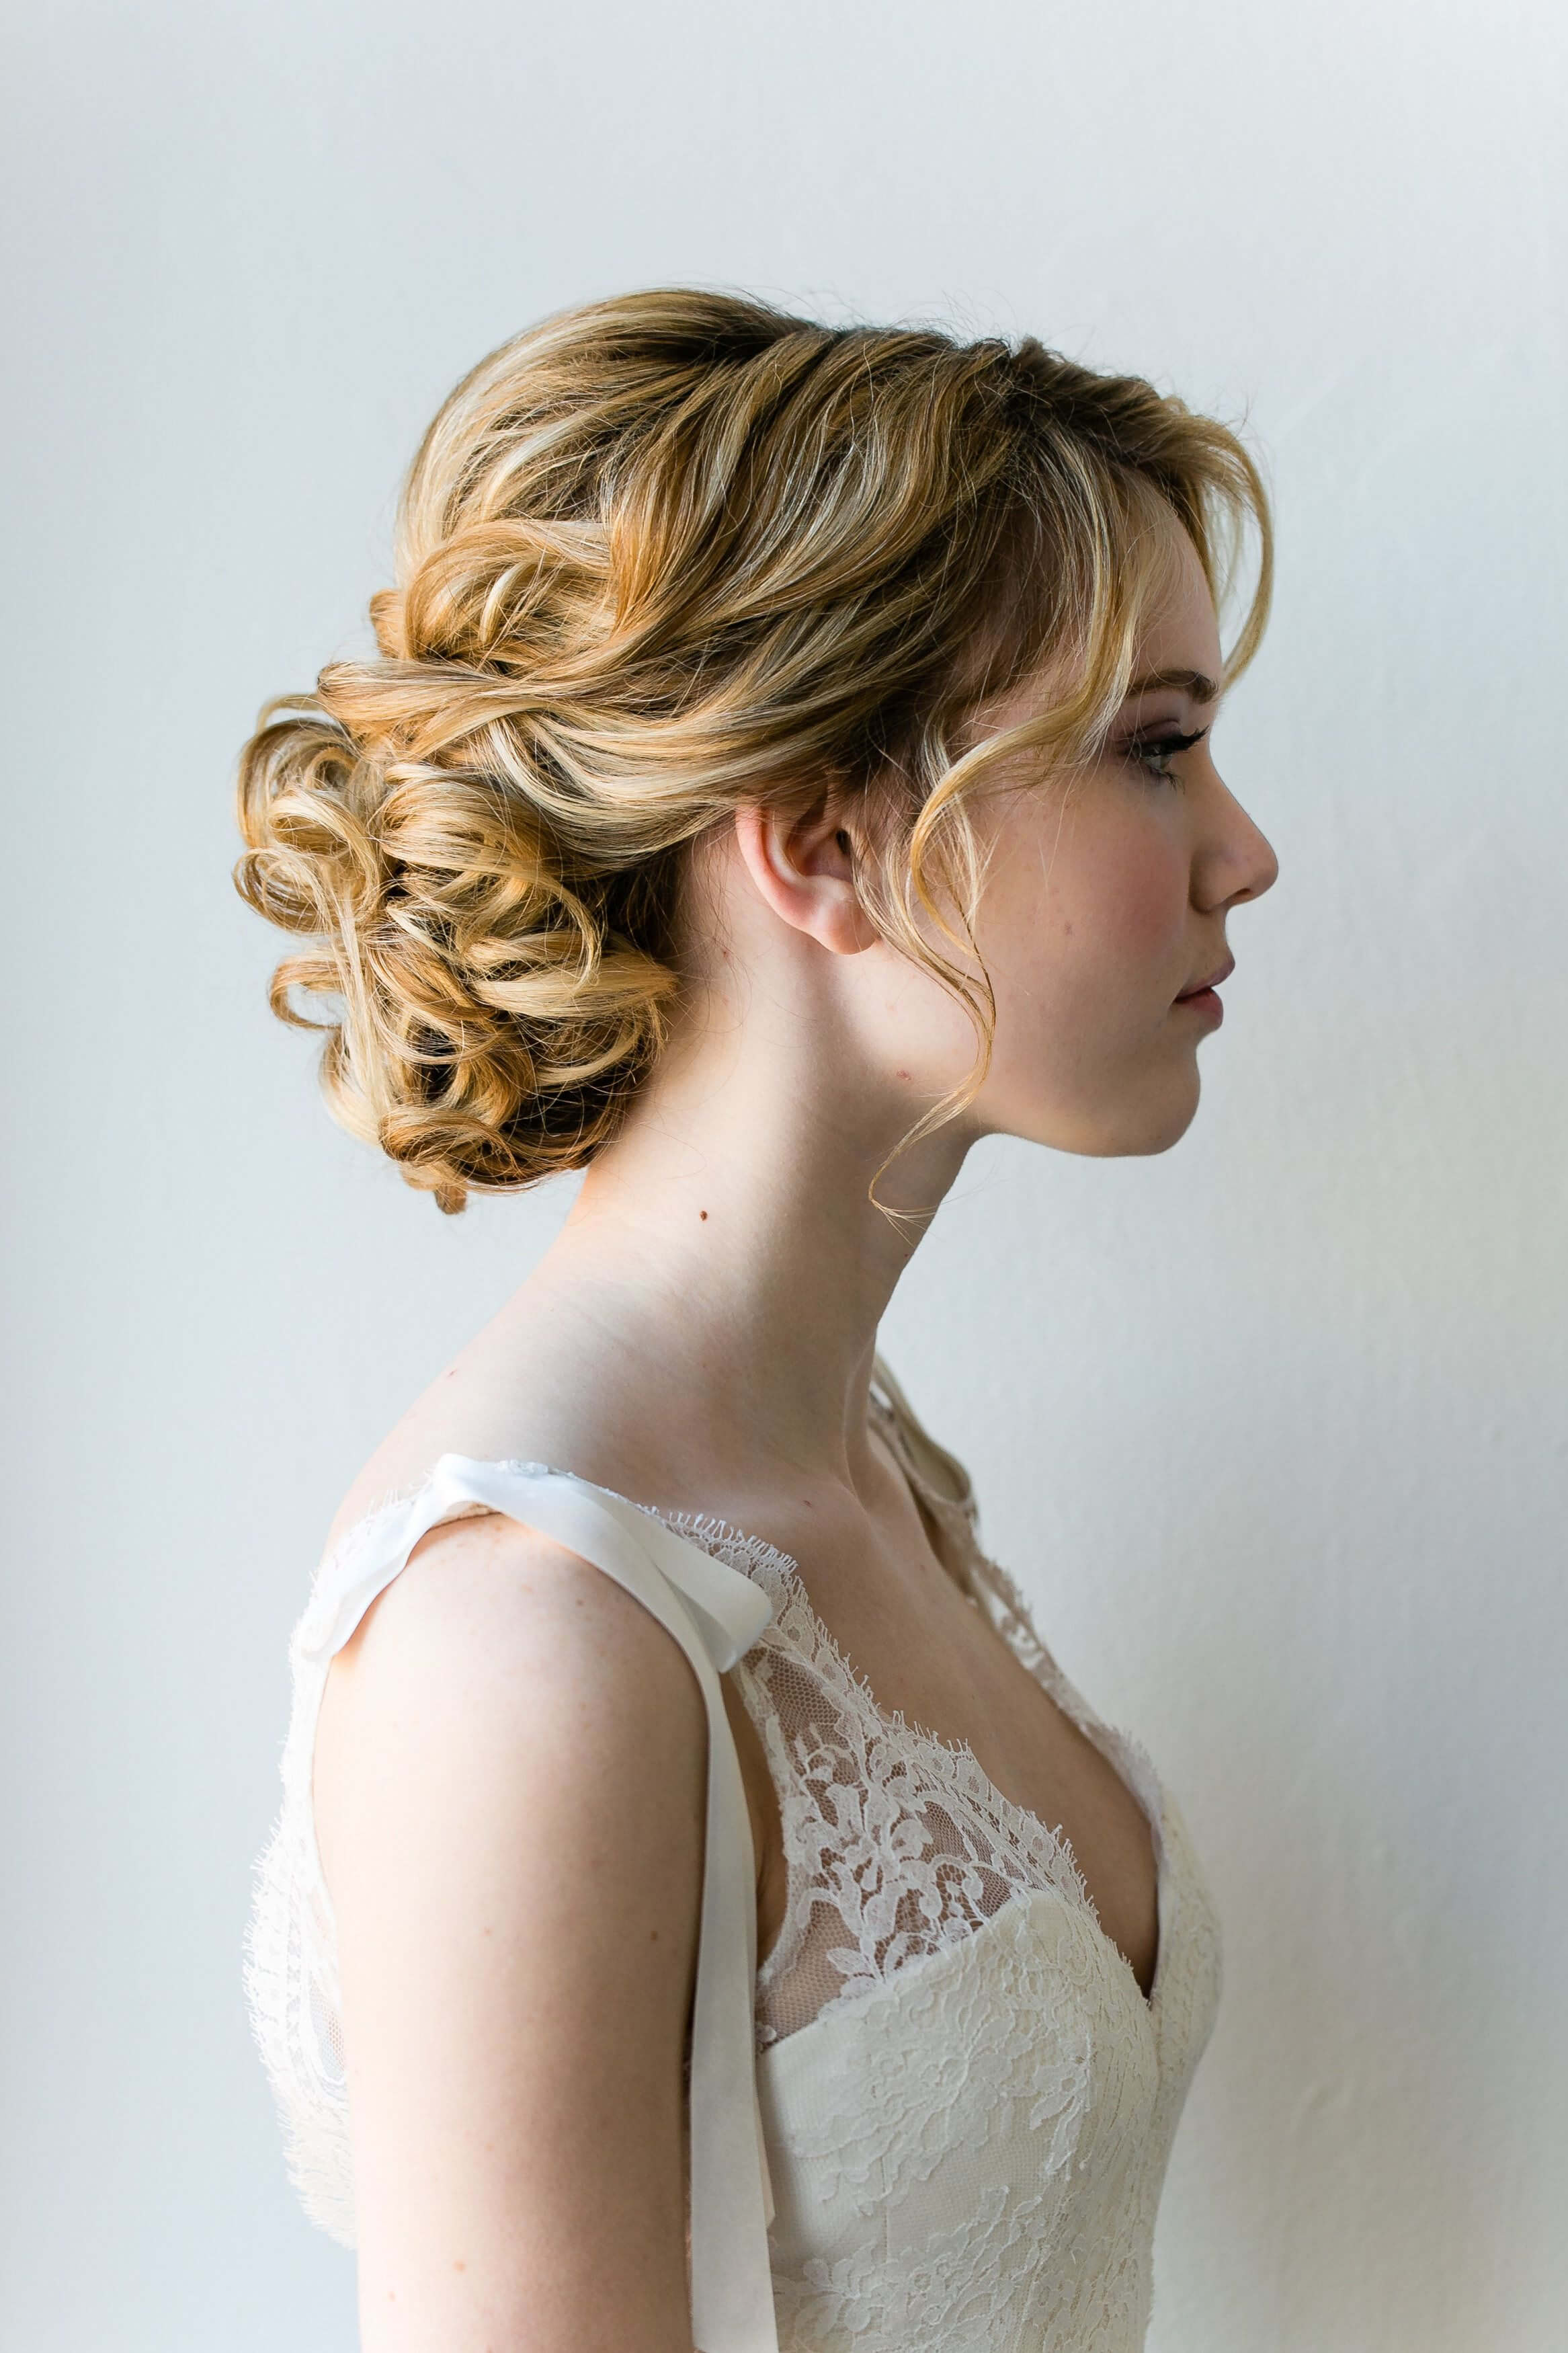 25 + Curly Updo Hairstyles  Flaunt Your Curls and Create a New Style